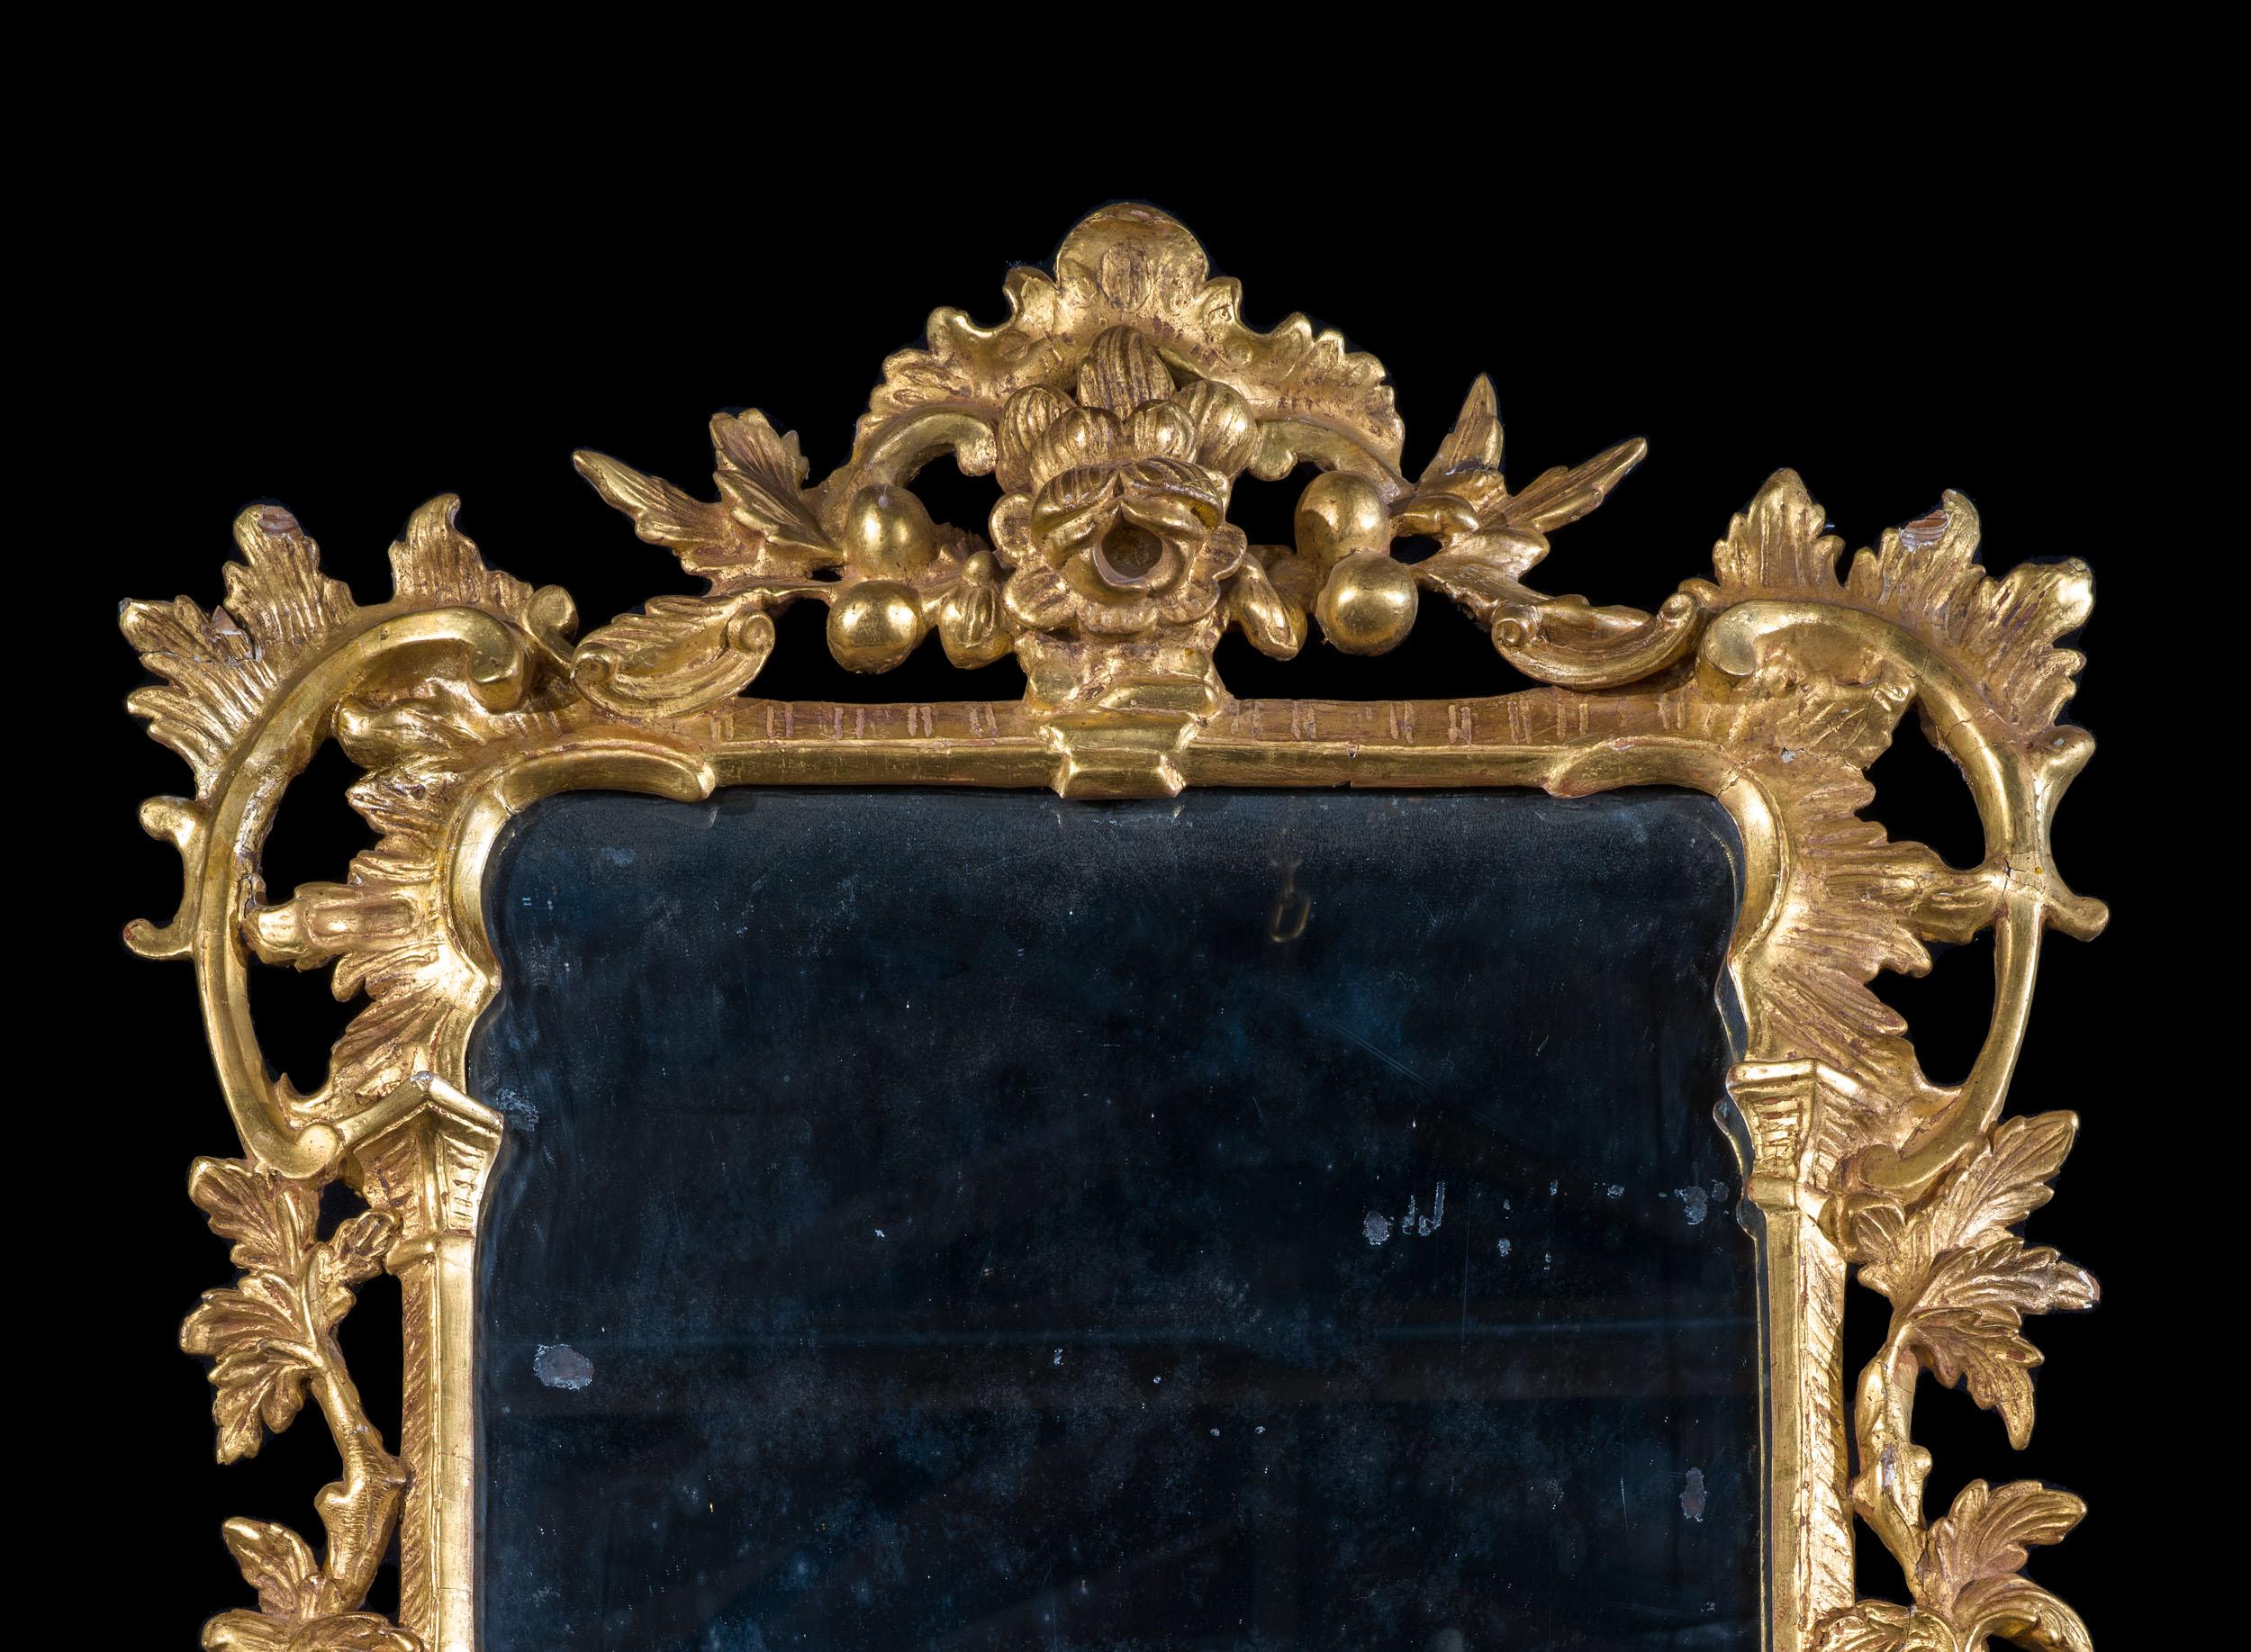 A fine George III giltwood wall mirror very much in the Chippendale manner, the fine frame a profusion of c scrolls and stylised foliate decoration naturalistically entwined. Original mercury plate.
Irish, c.1760.
